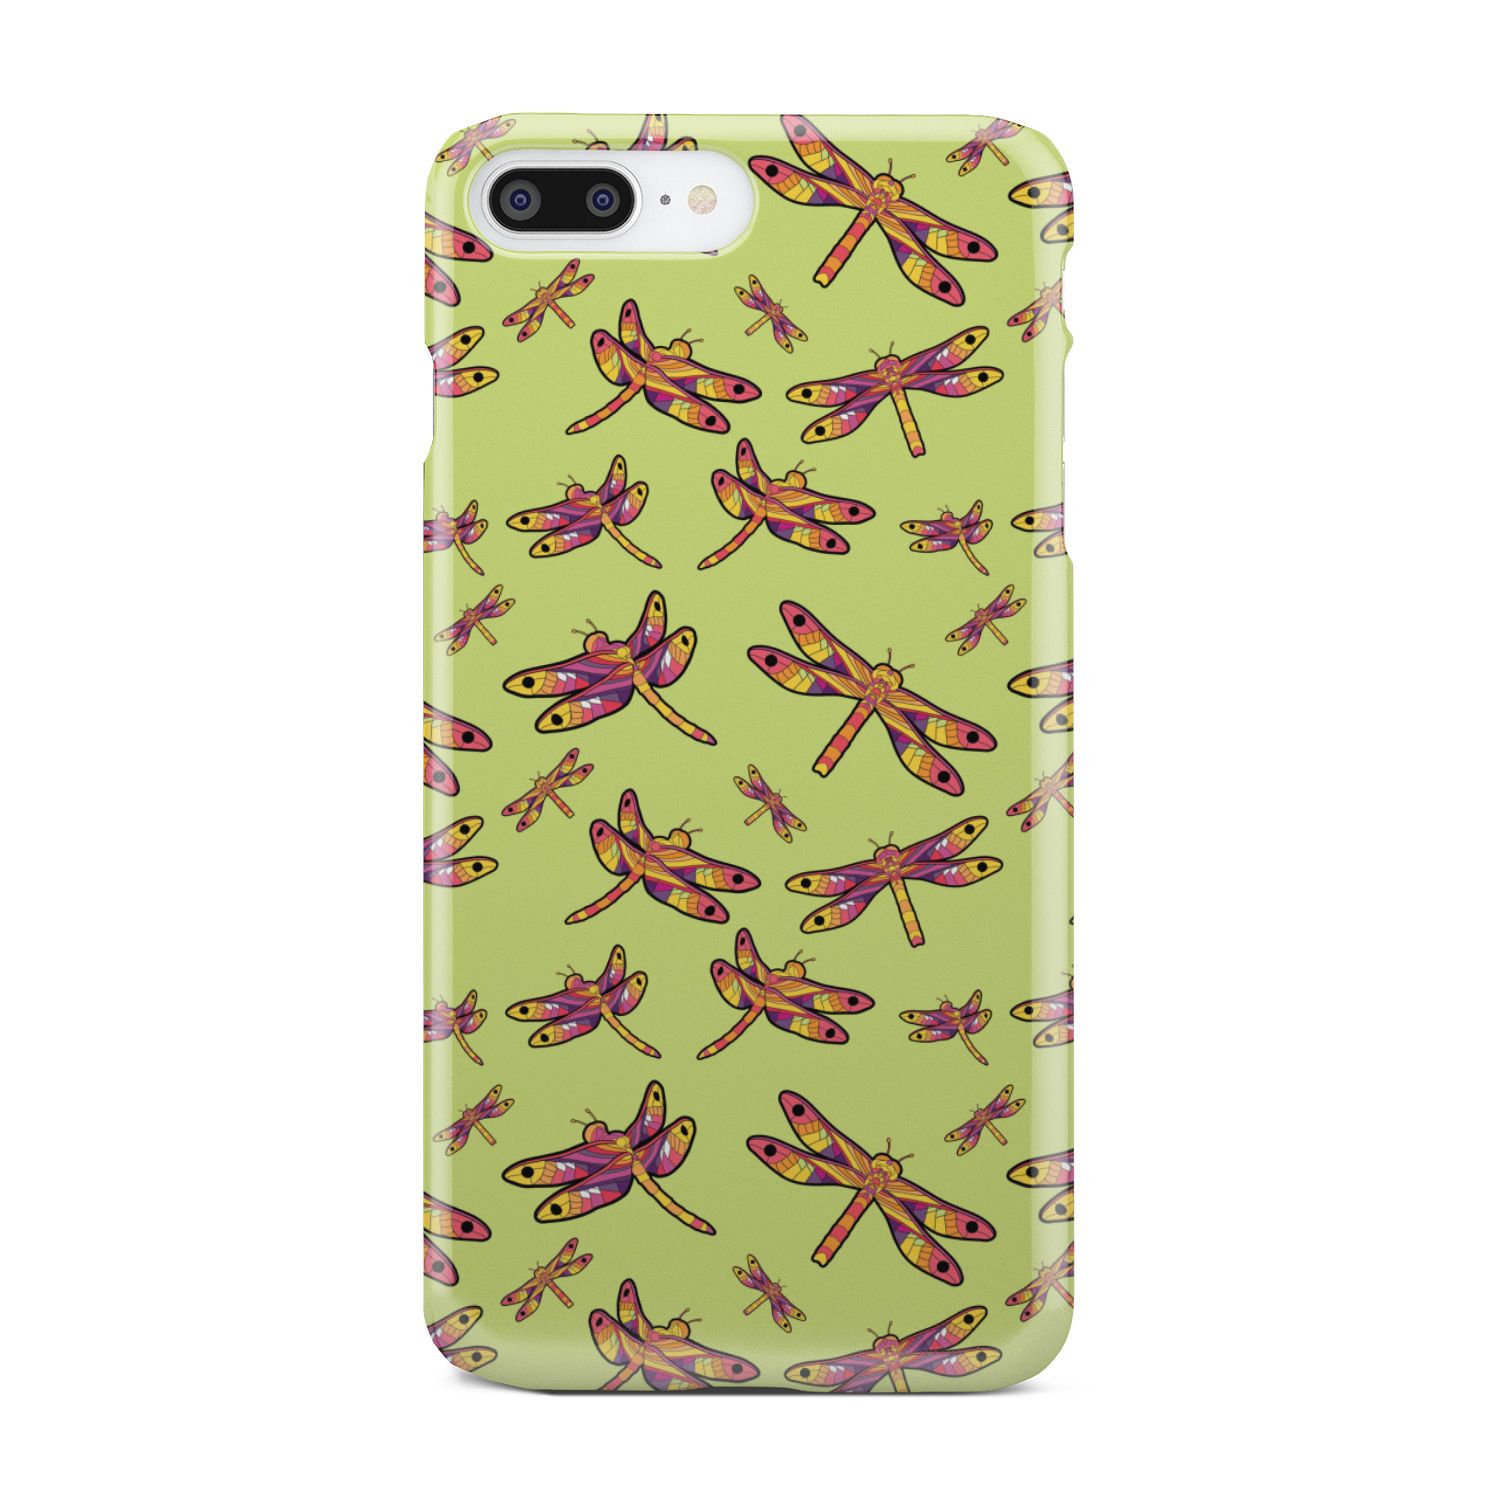 Gathering Lime Phone Case Phone Case wc-fulfillment iPhone 8 Plus 